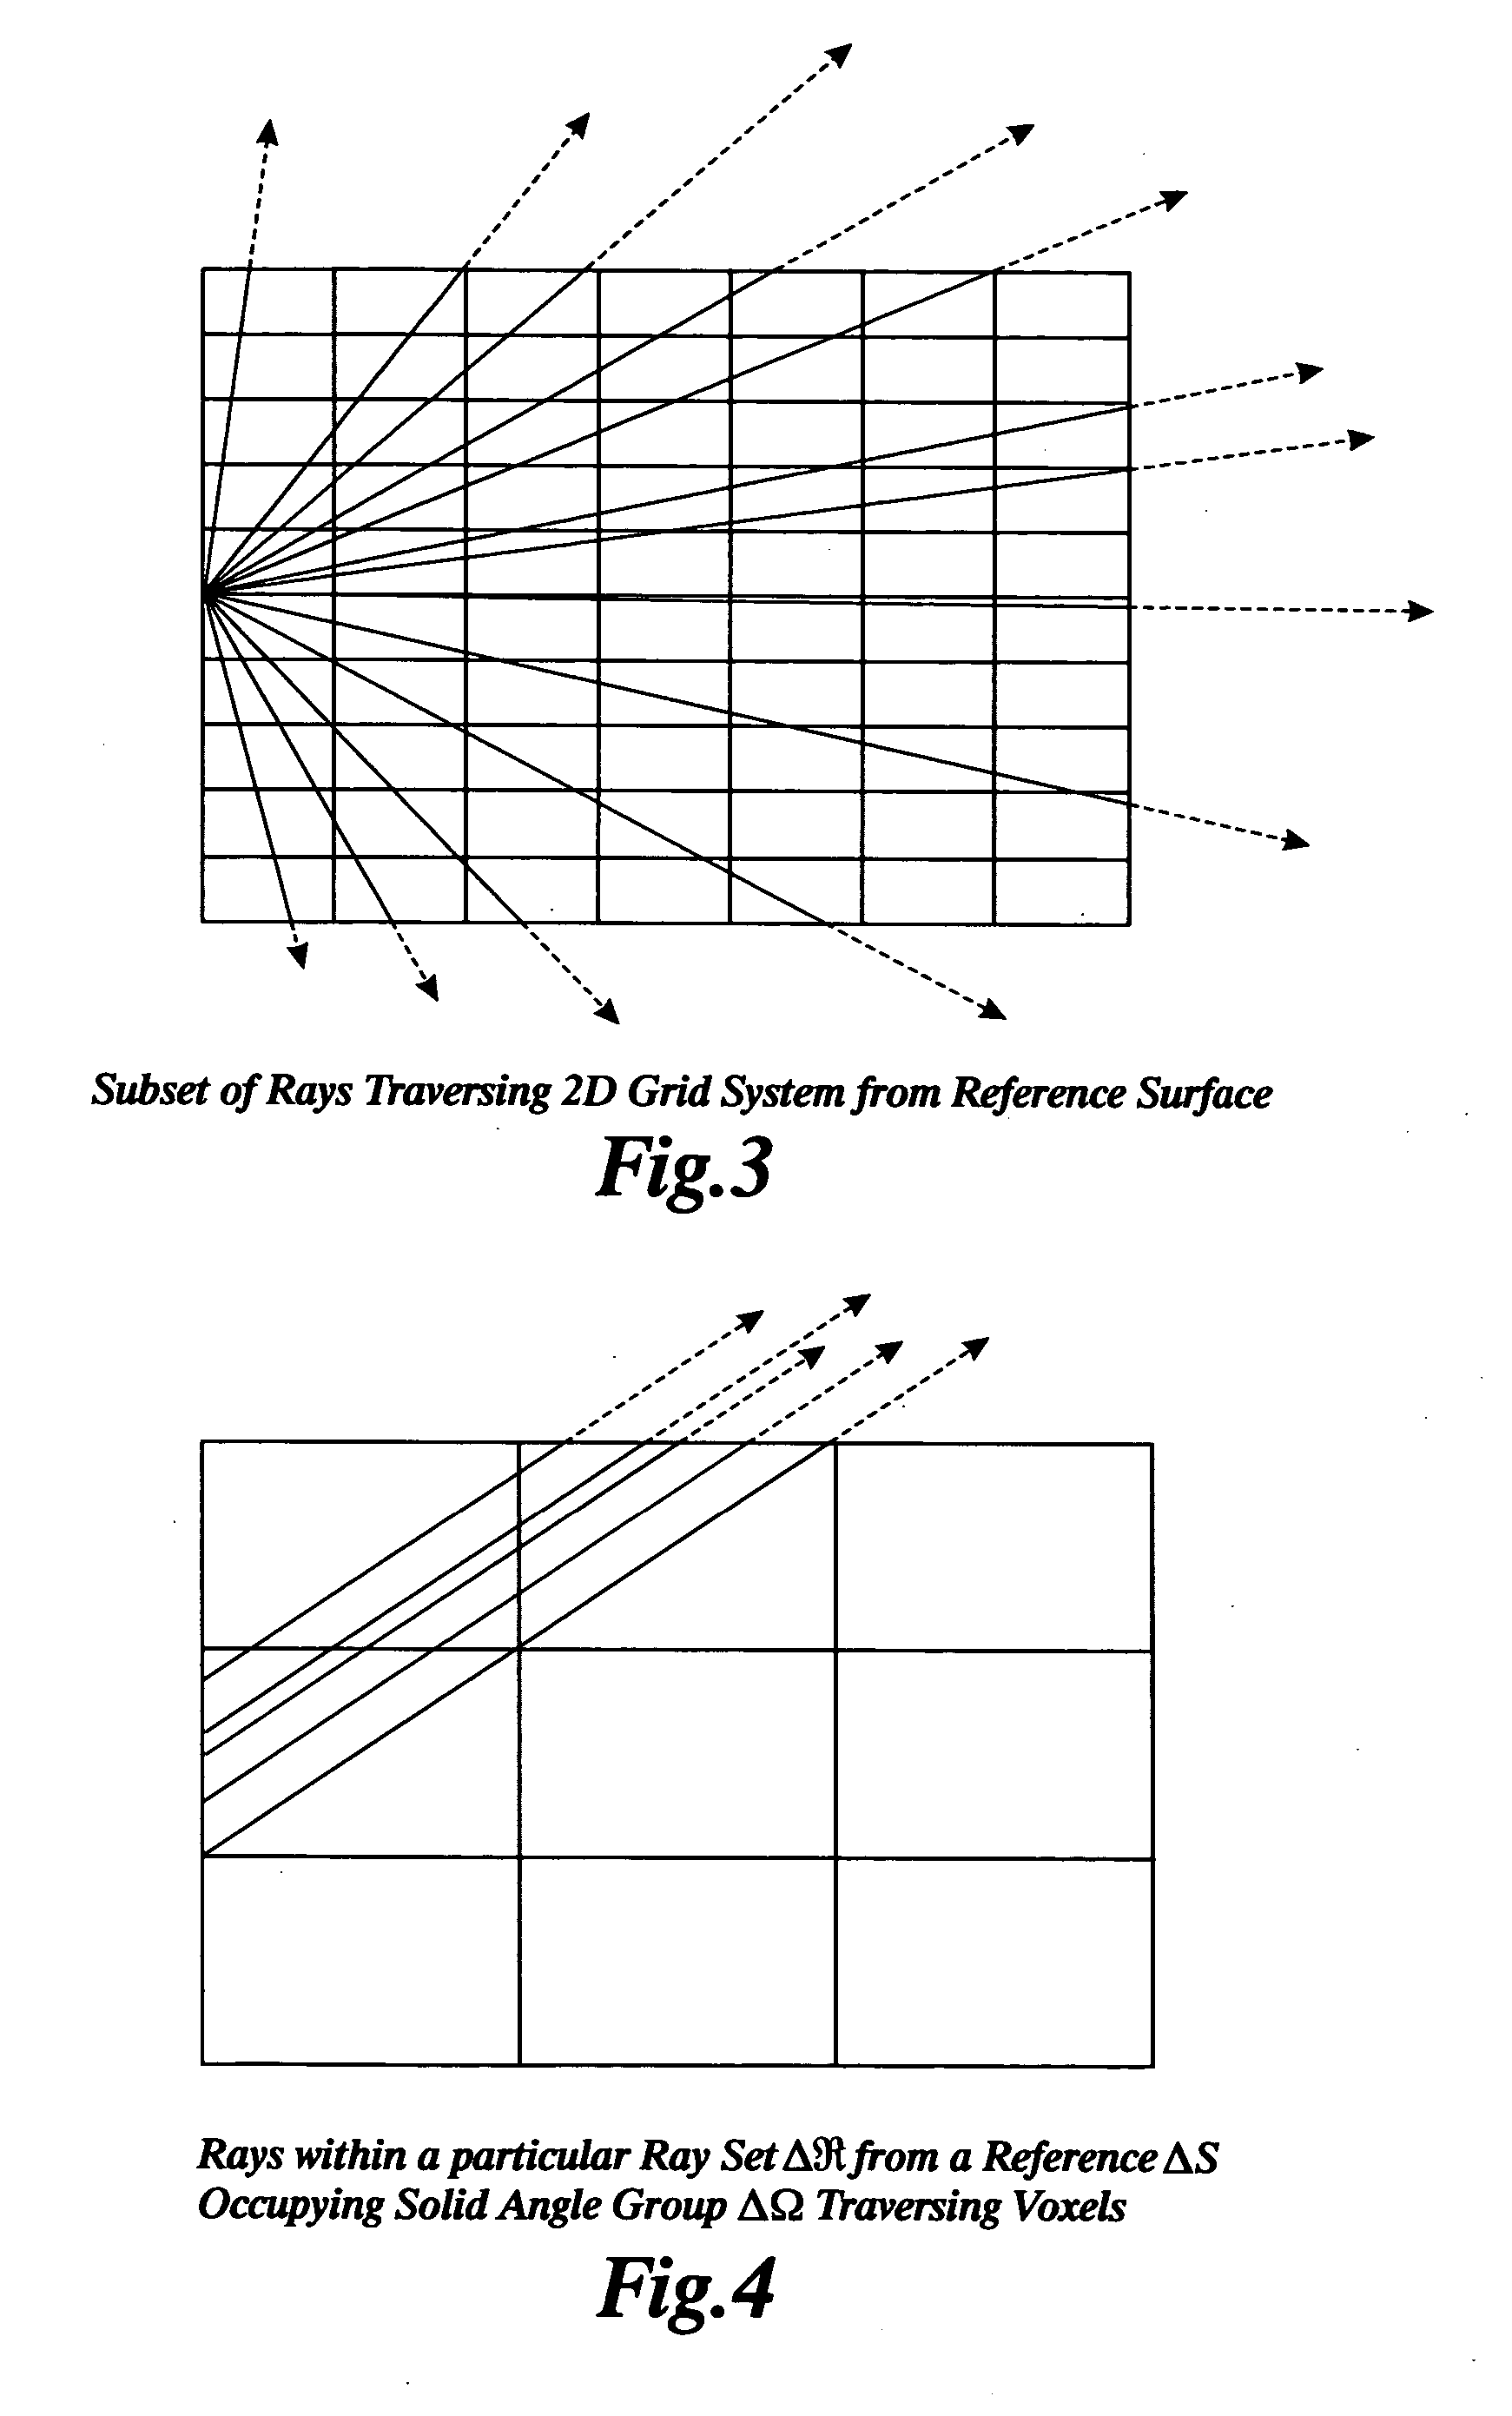 Computation of radiating particle and wave distributions using a generalized discrete field constructed from representative ray sets